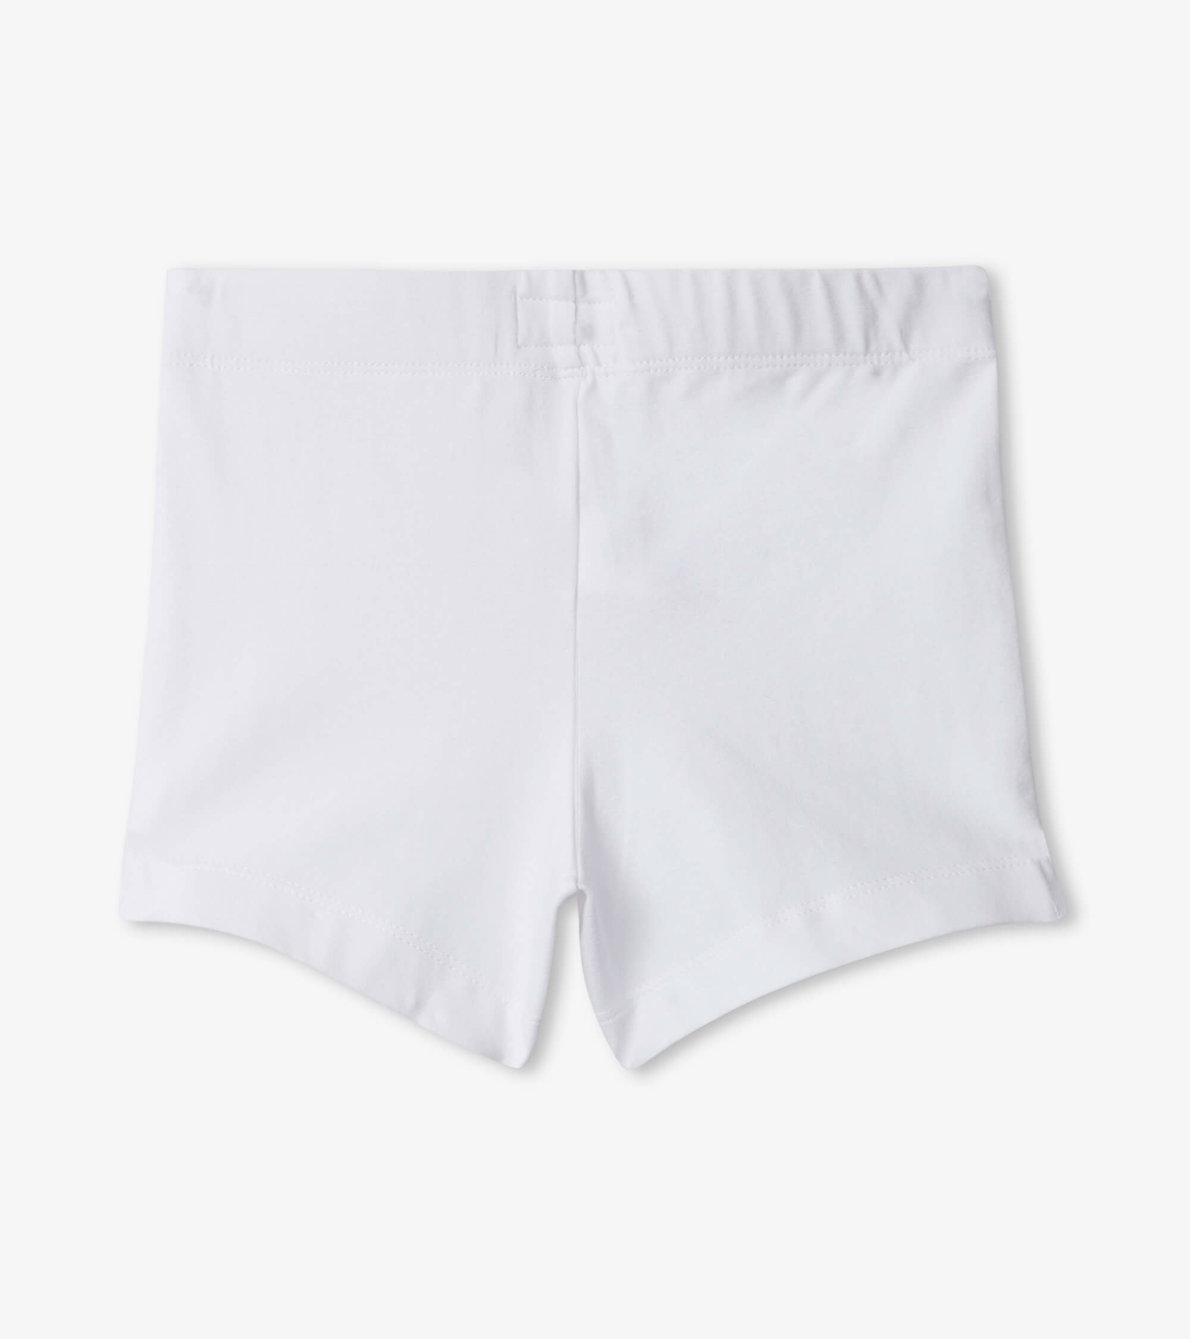 View larger image of White Summer Shorts